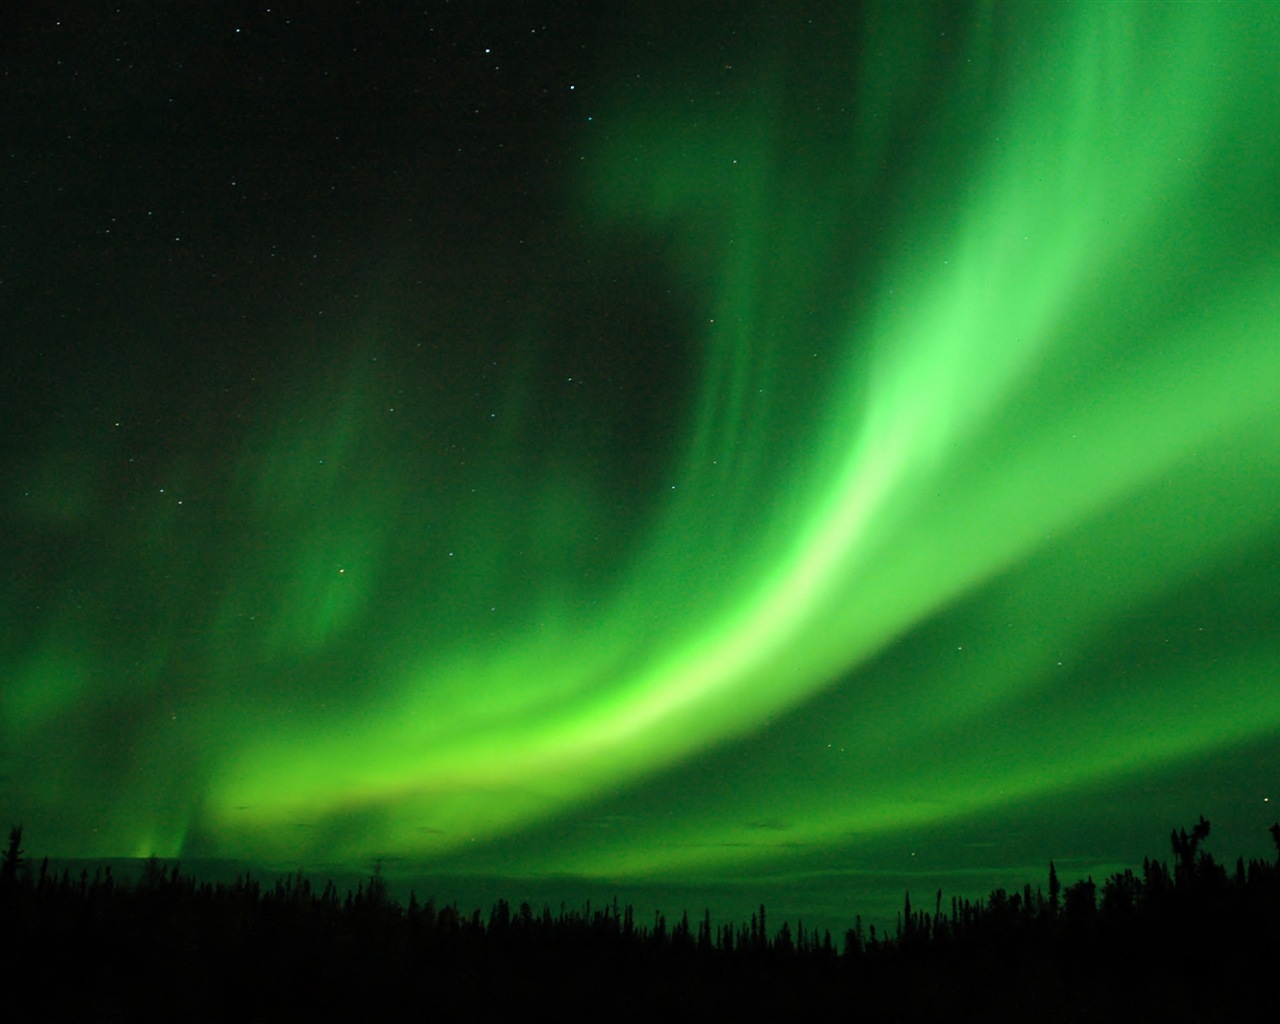 Natural wonders of the Northern Lights HD Wallpaper (1) #4 - 1280x1024